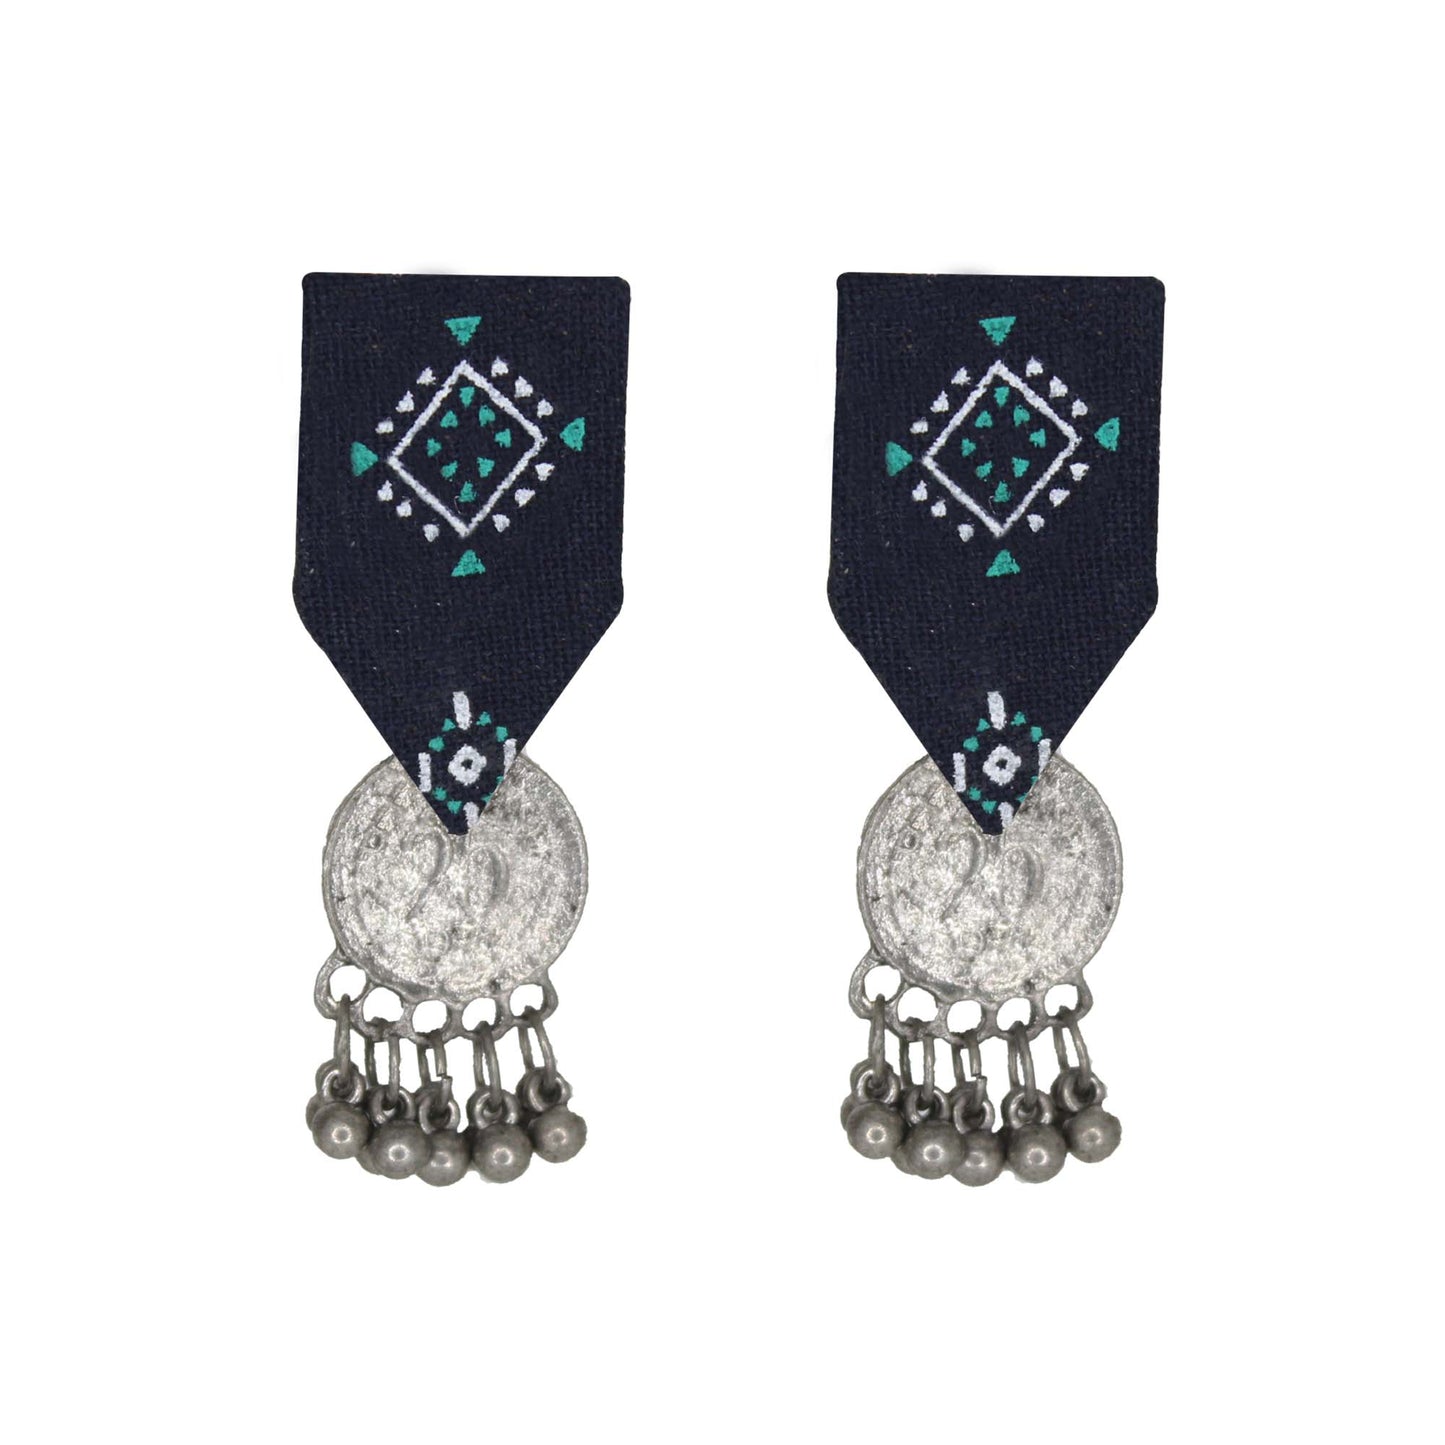 Organic Vibes Handmade Blue Geometrical Stud With Antique Coin Studded Fabric Earrings For Women